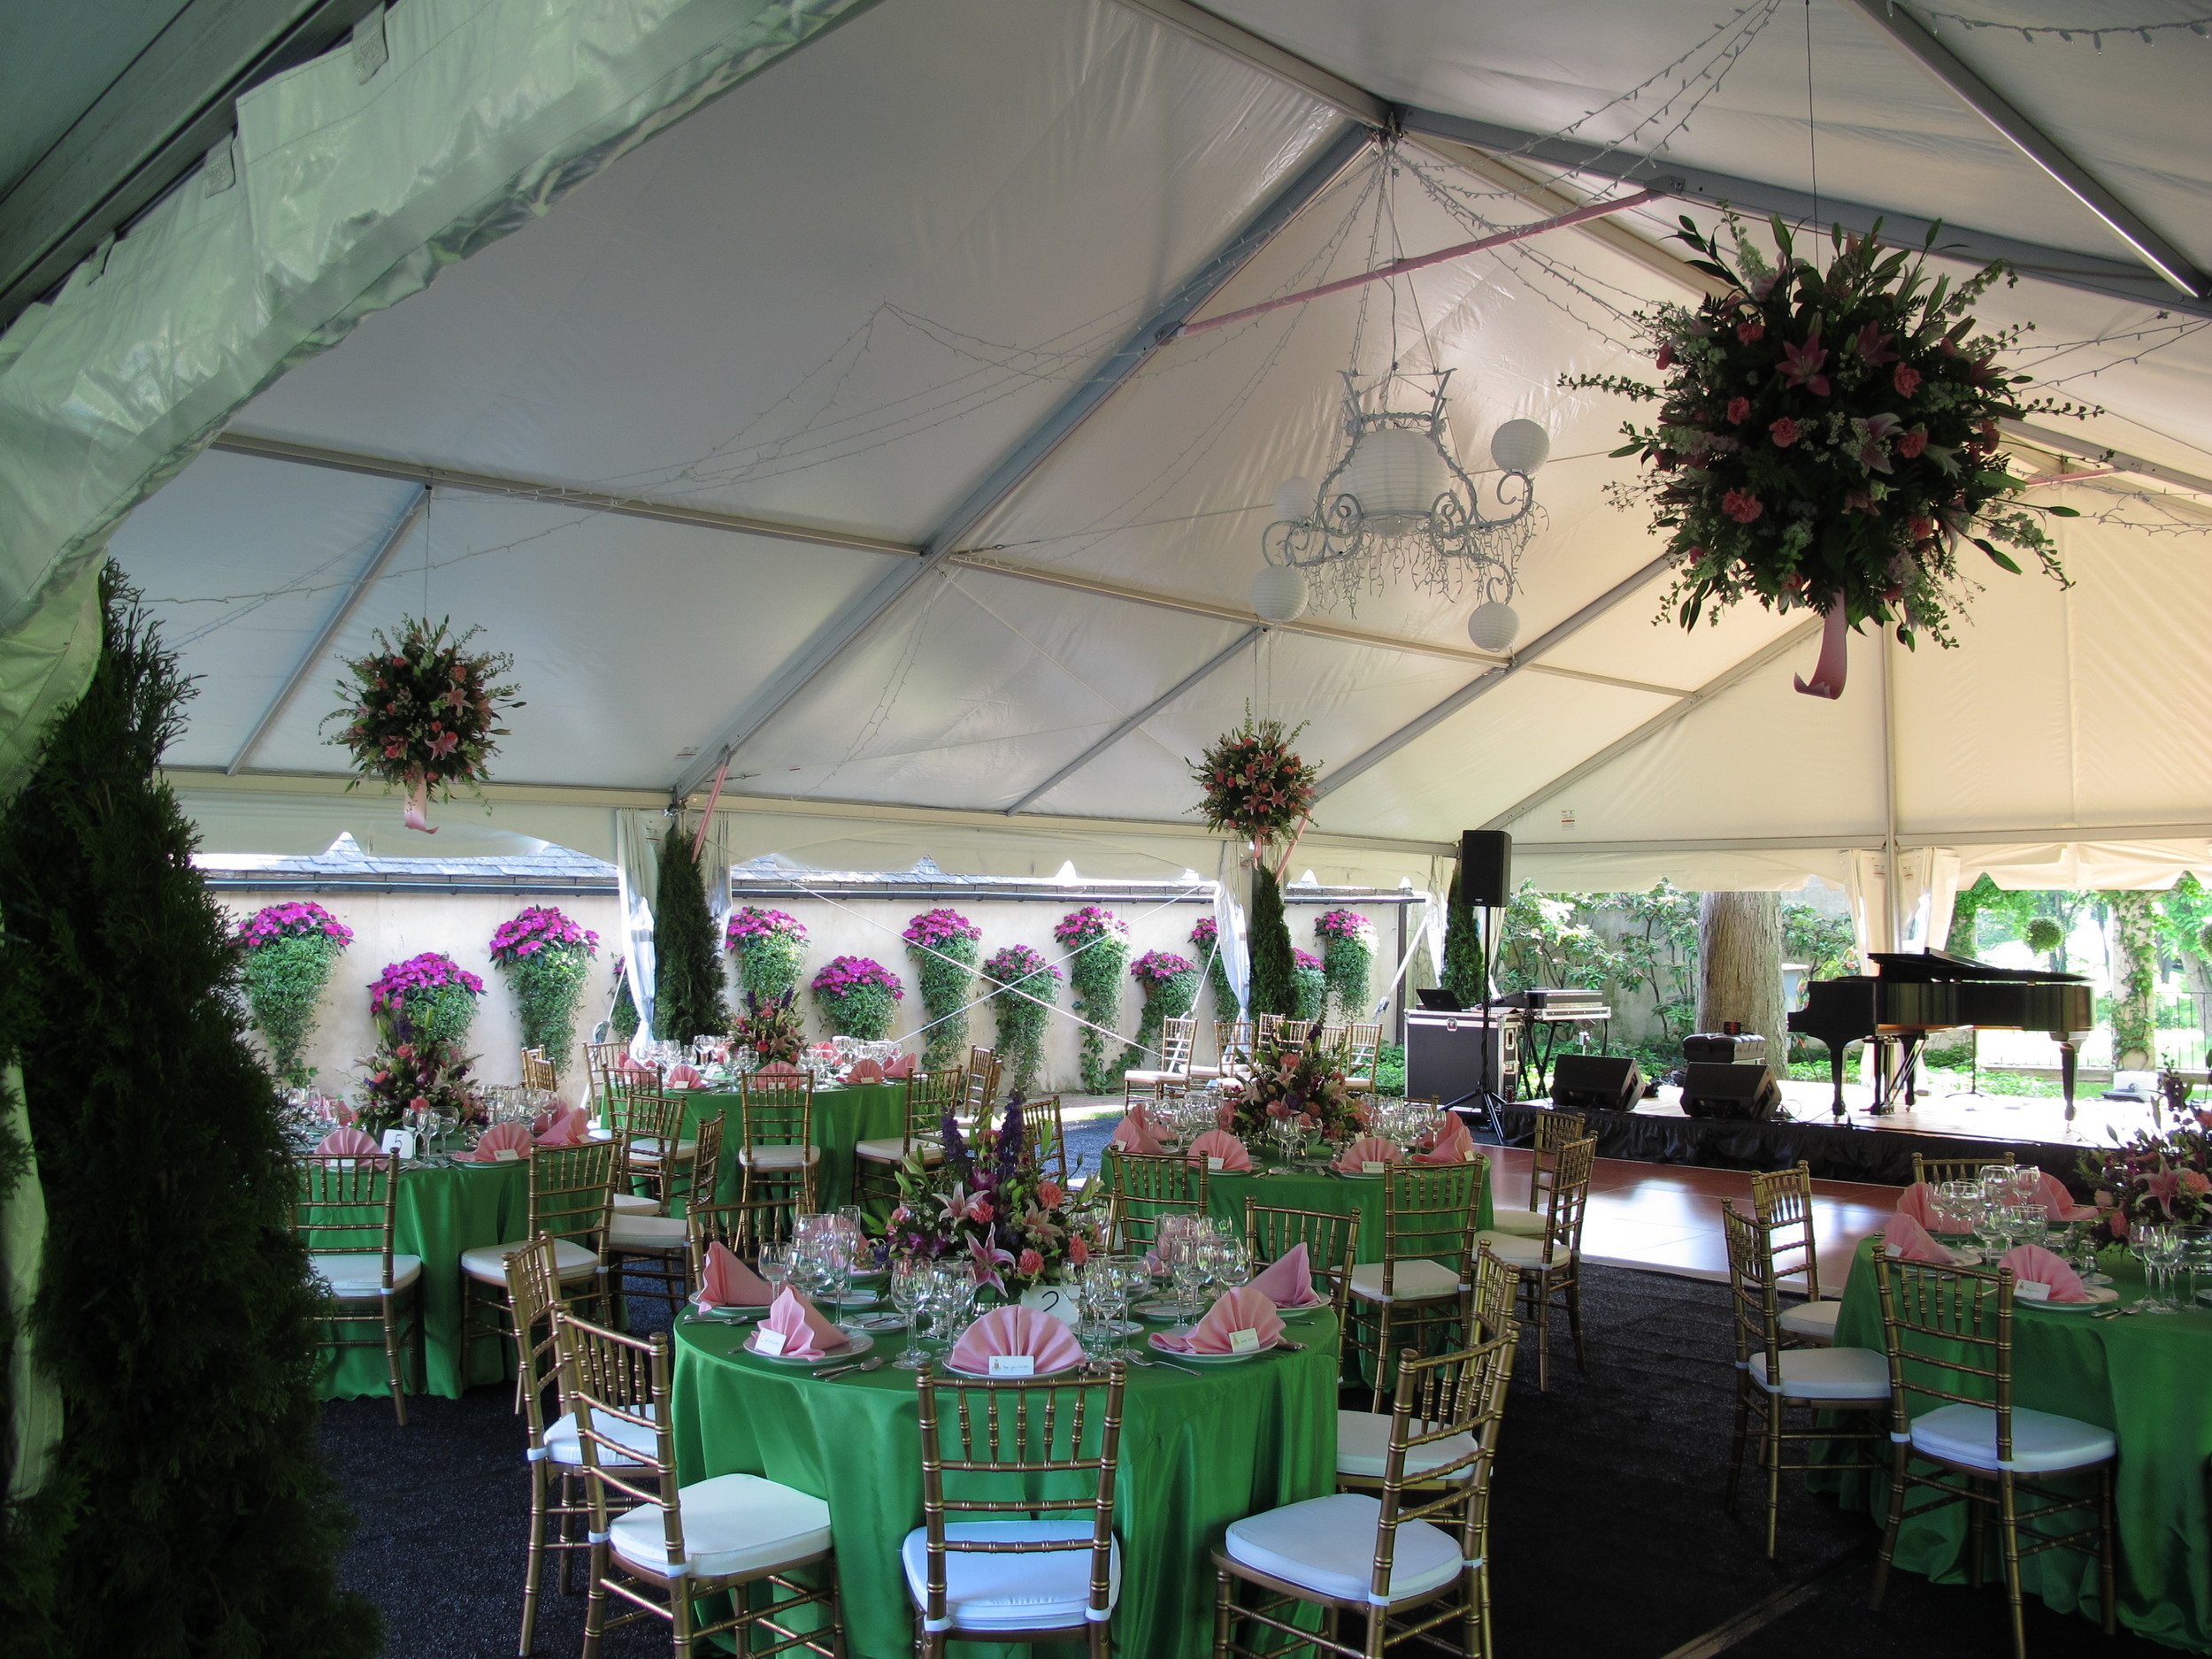 Party rentals in Wilkes-Barre